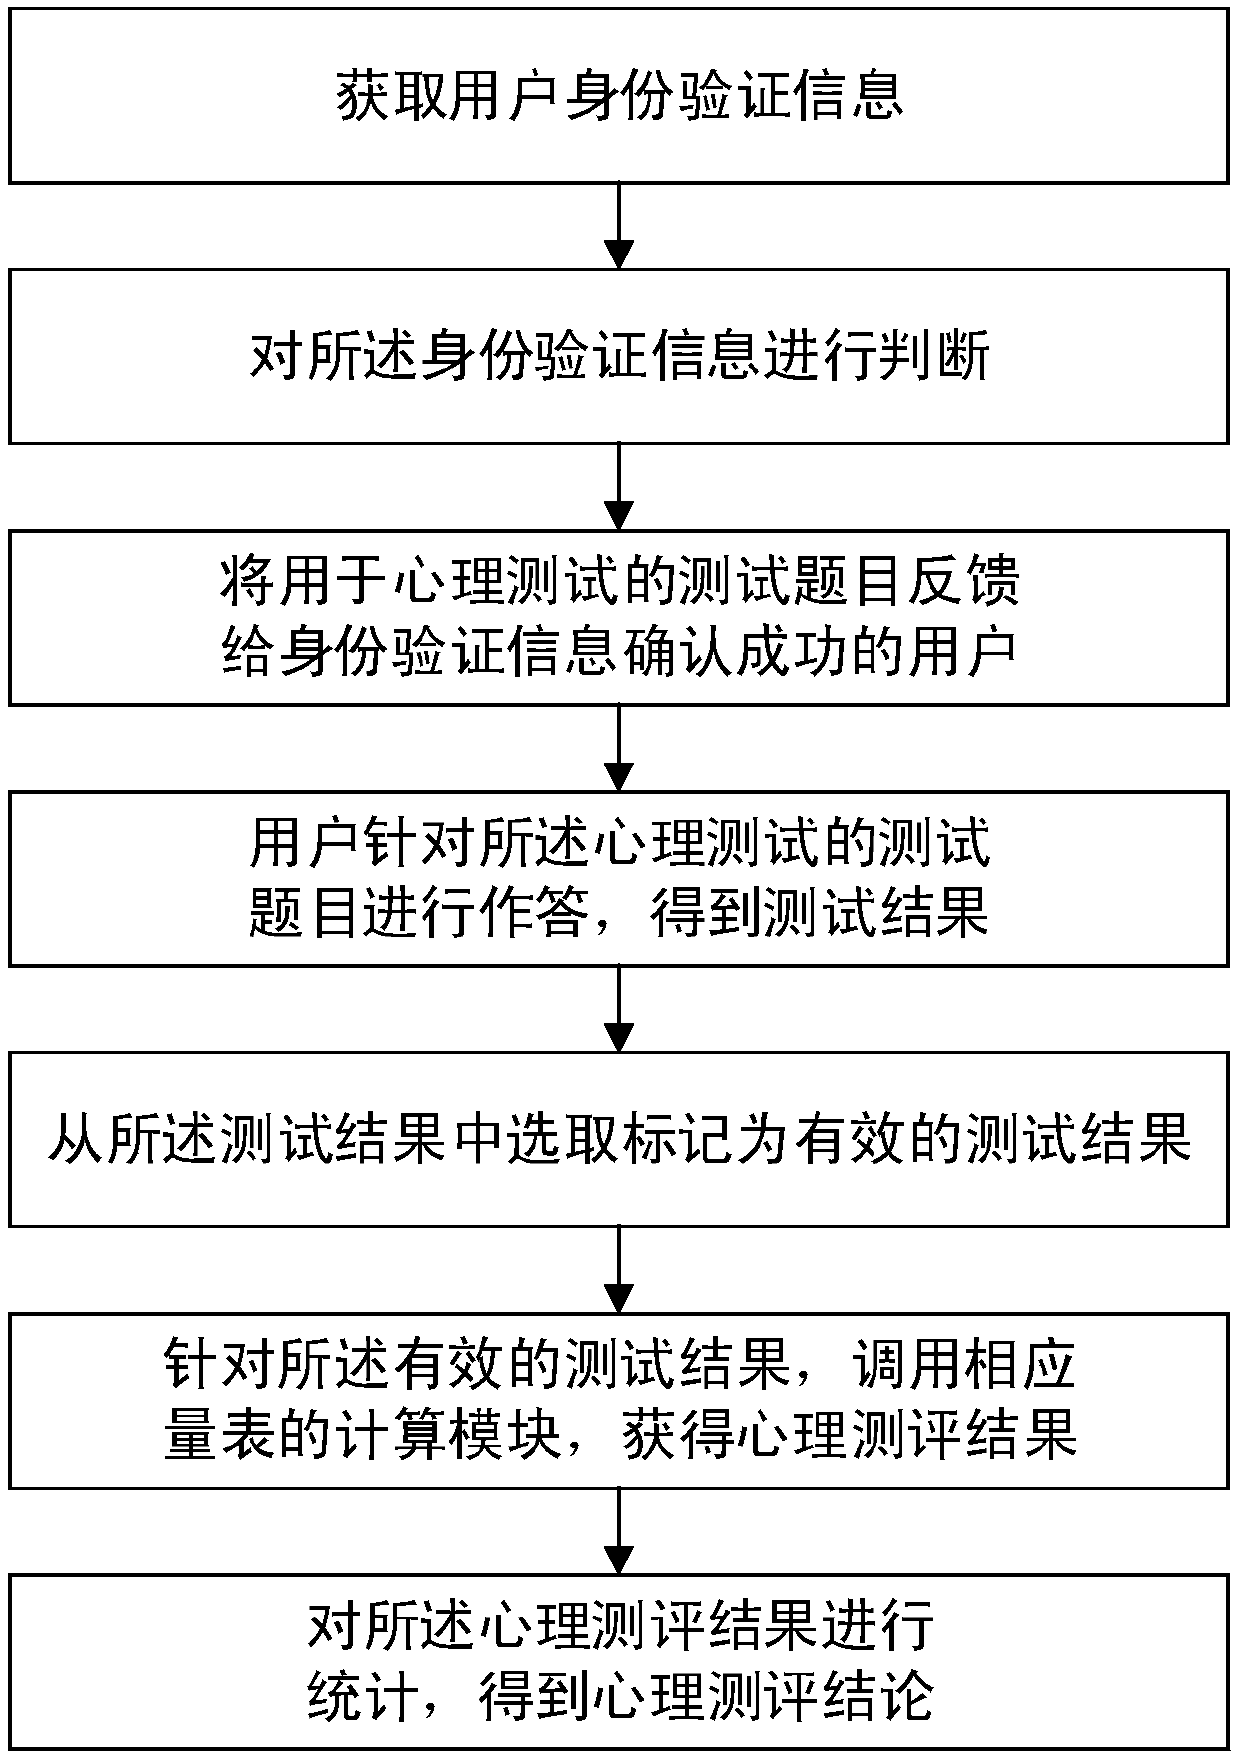 Group psychological assessment method, apparatus and system